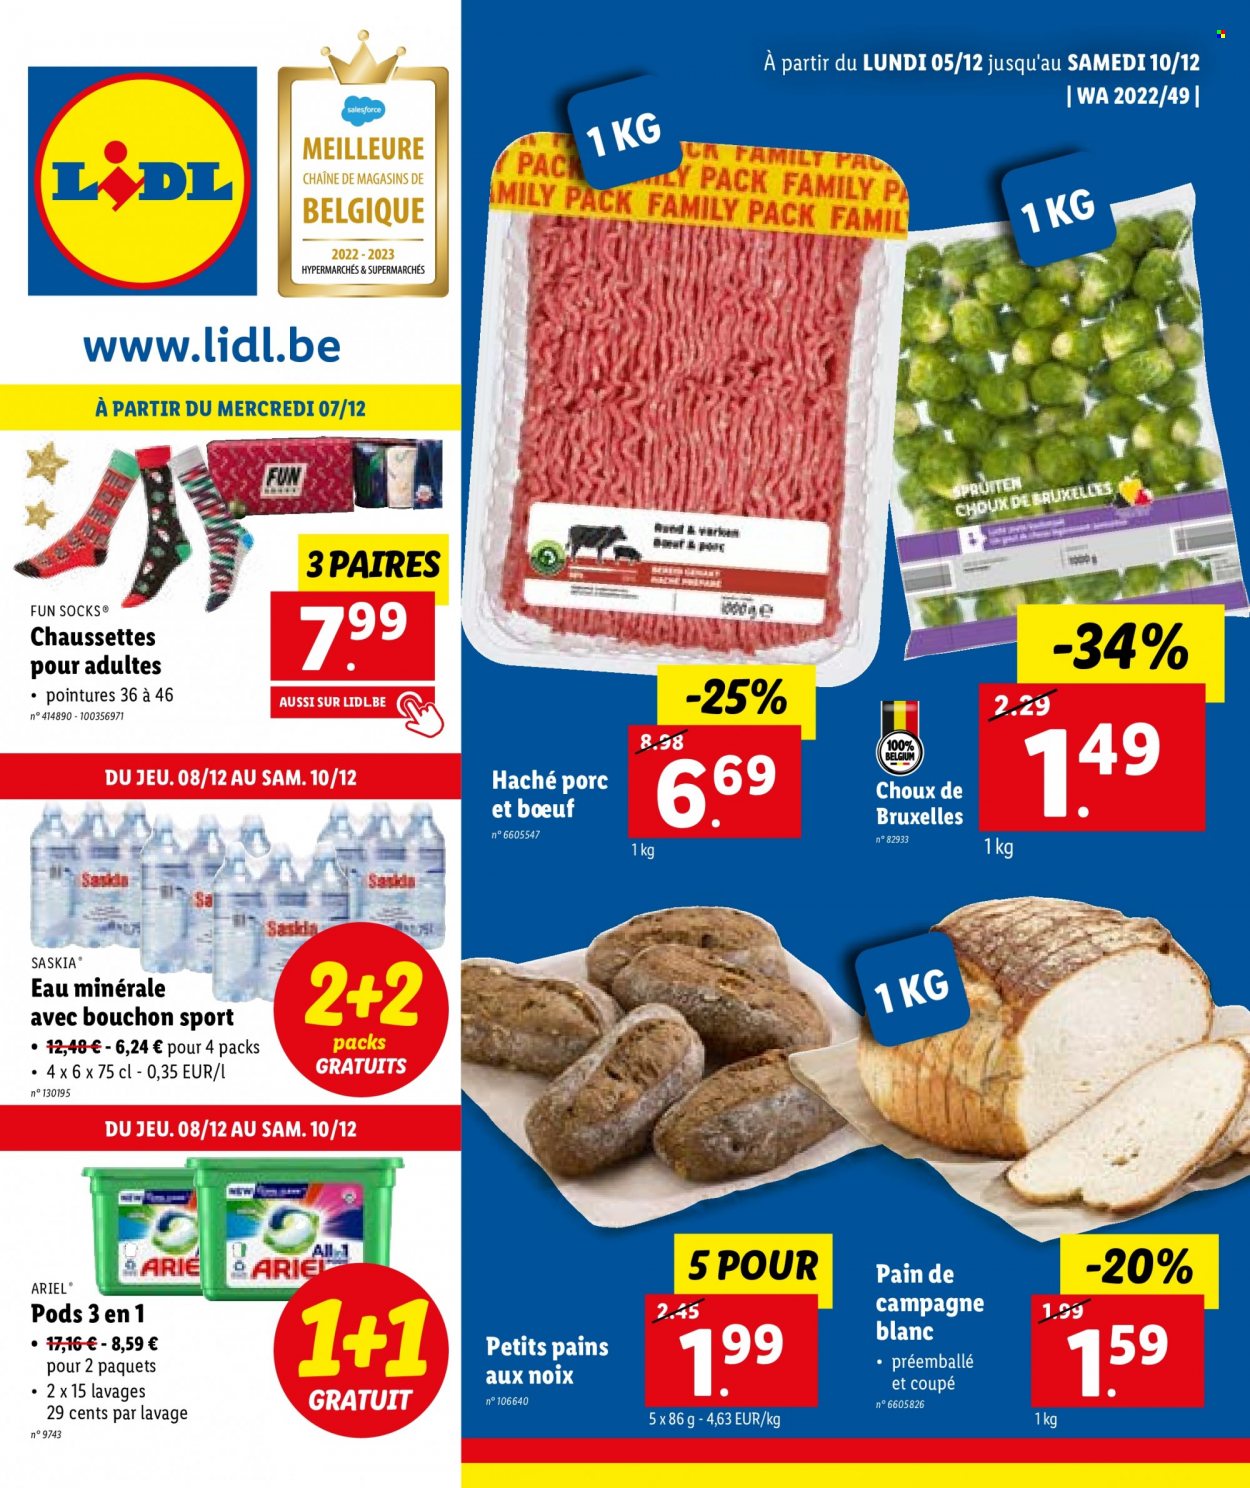 Catalogue Lidl - 5.12.2022 - 10.12.2022. Page 1.